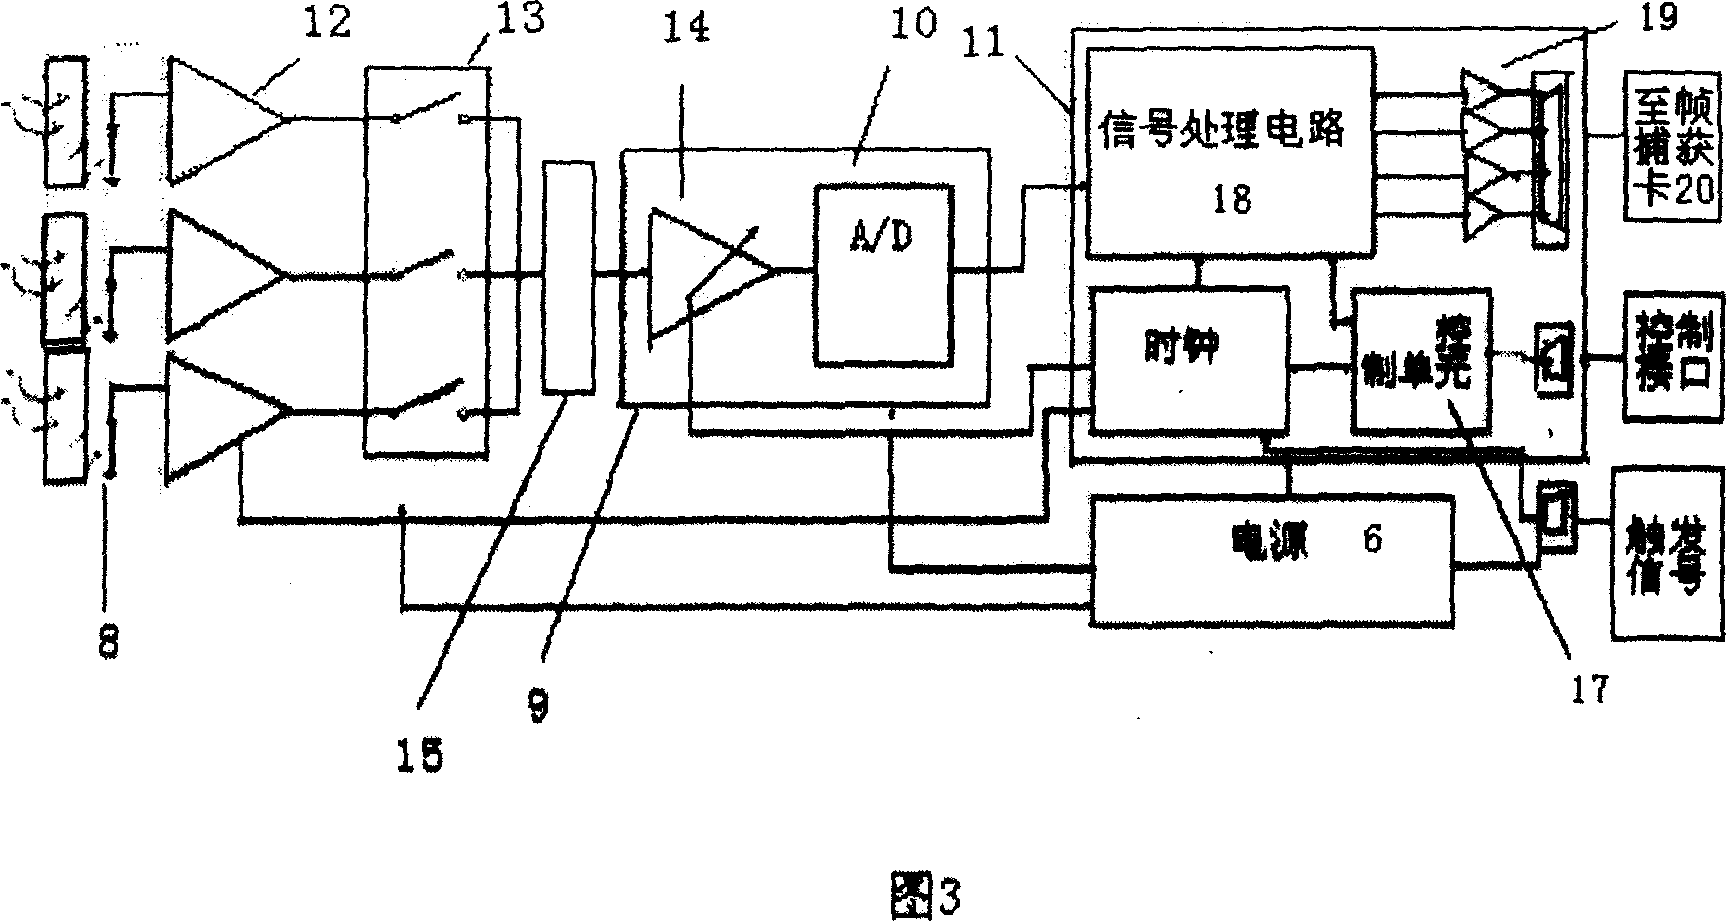 Damage-free detection system for strong conveying belt